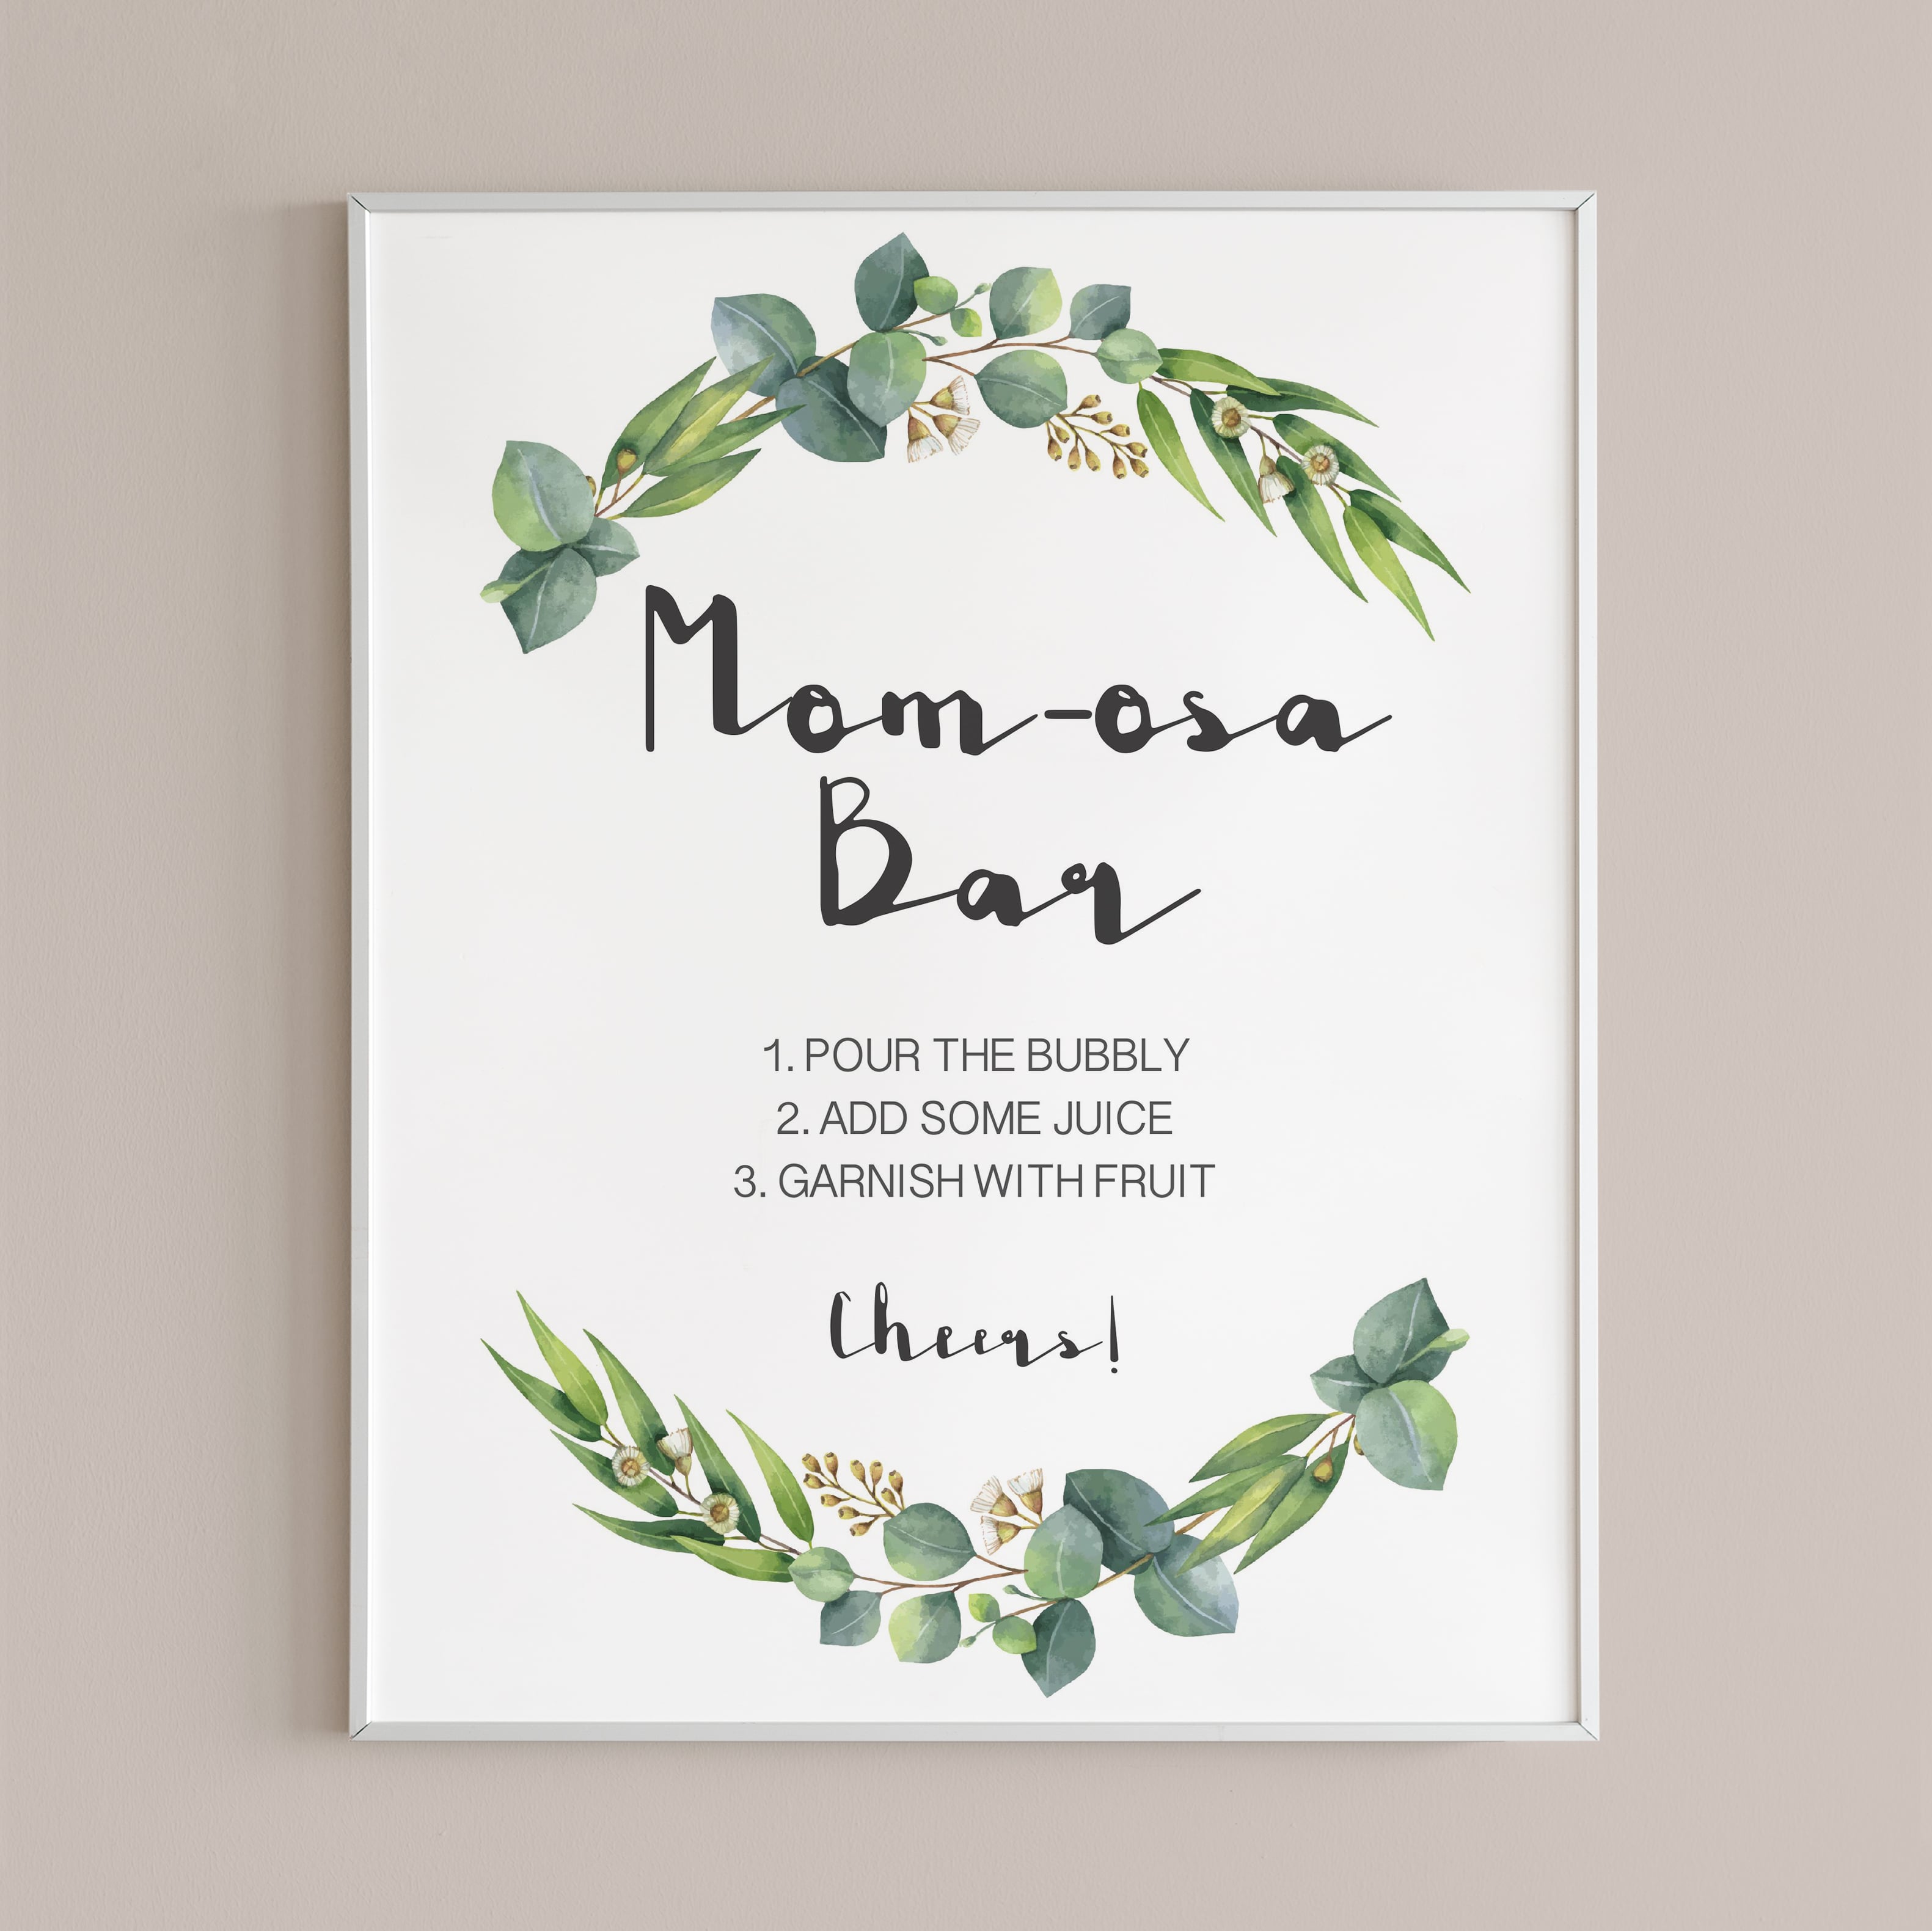 Momosa bar printable for botanical themed baby shower by LittleSizzle